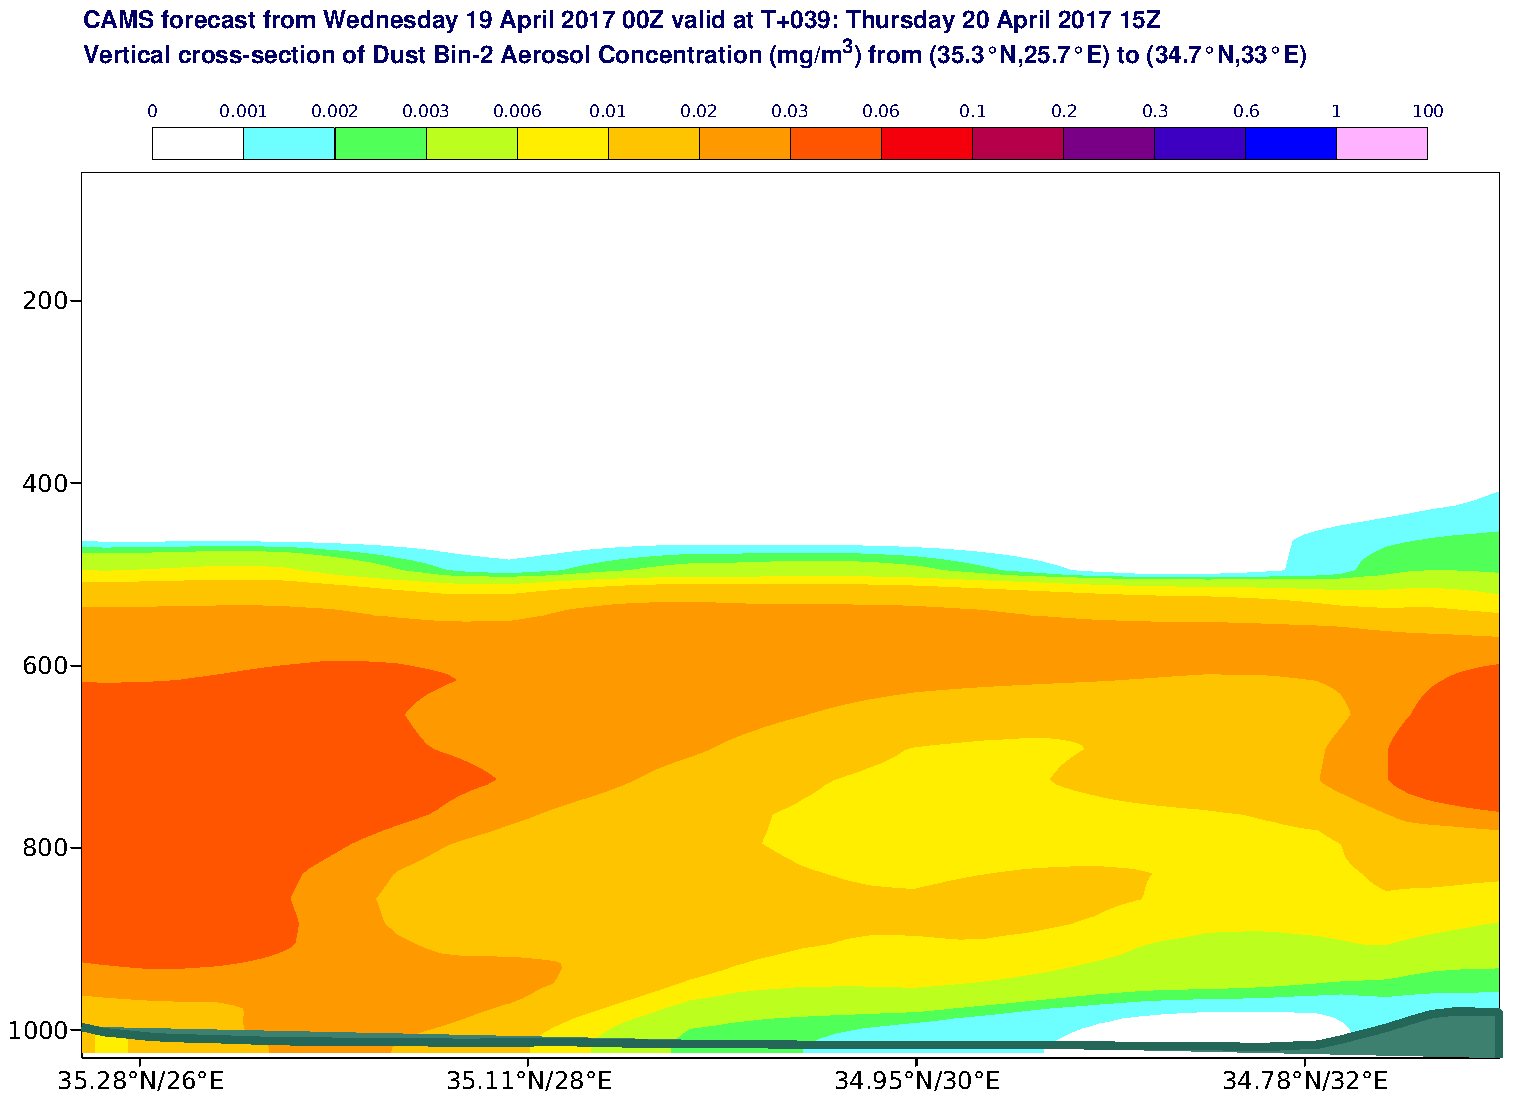 Vertical cross-section of Dust Bin-2 Aerosol Concentration (mg/m3) valid at T39 - 2017-04-20 15:00